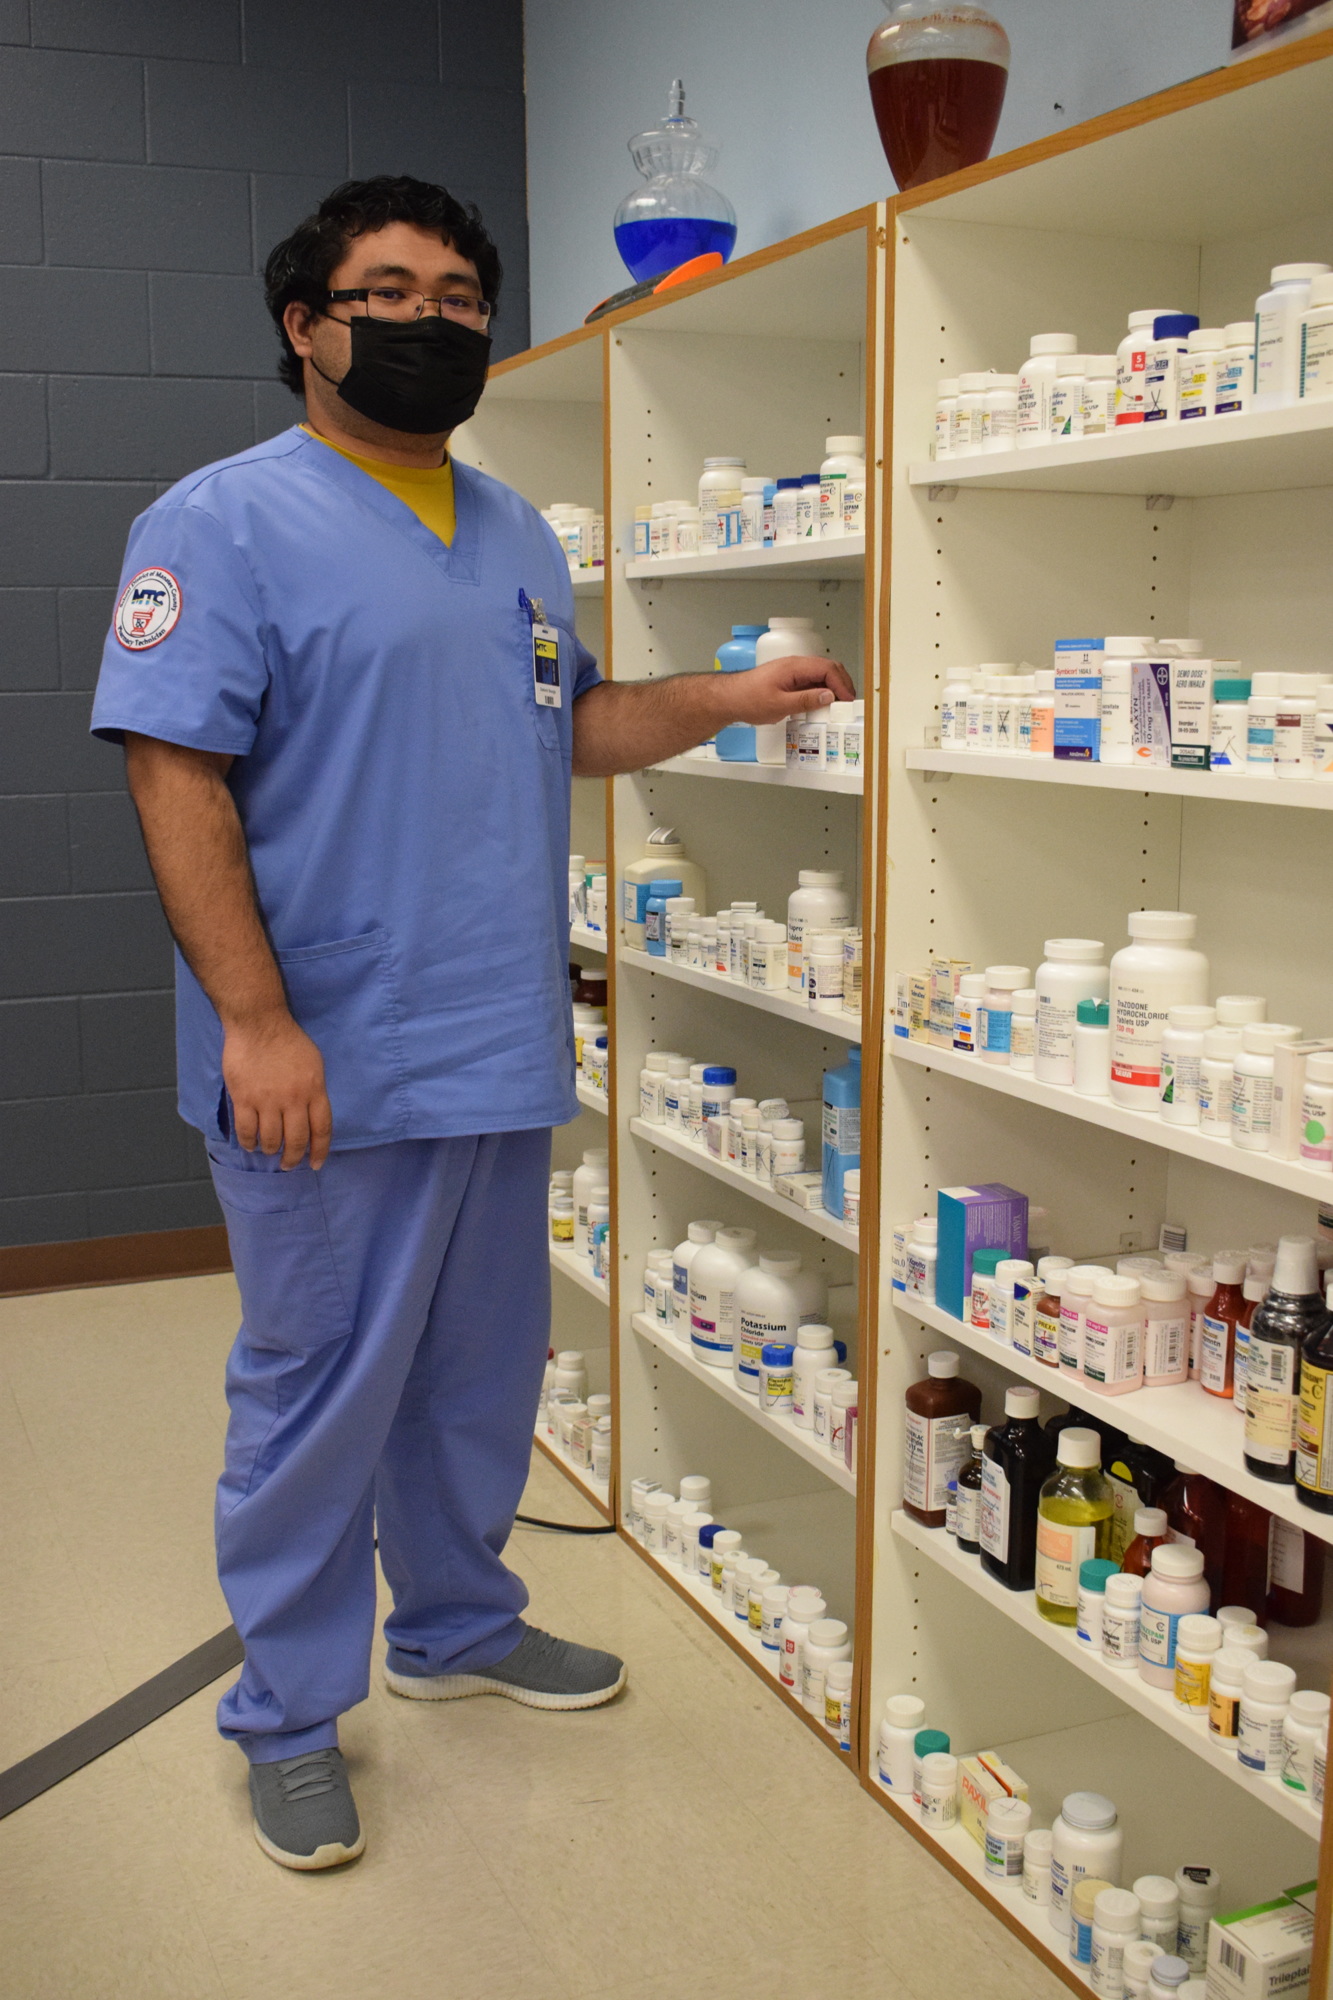 Zodock Sturgis, a Pharmacy Technician student, is preparing for his national certification exam. A hybrid schedule will be offered for Pharmacy Technician students in the fall.